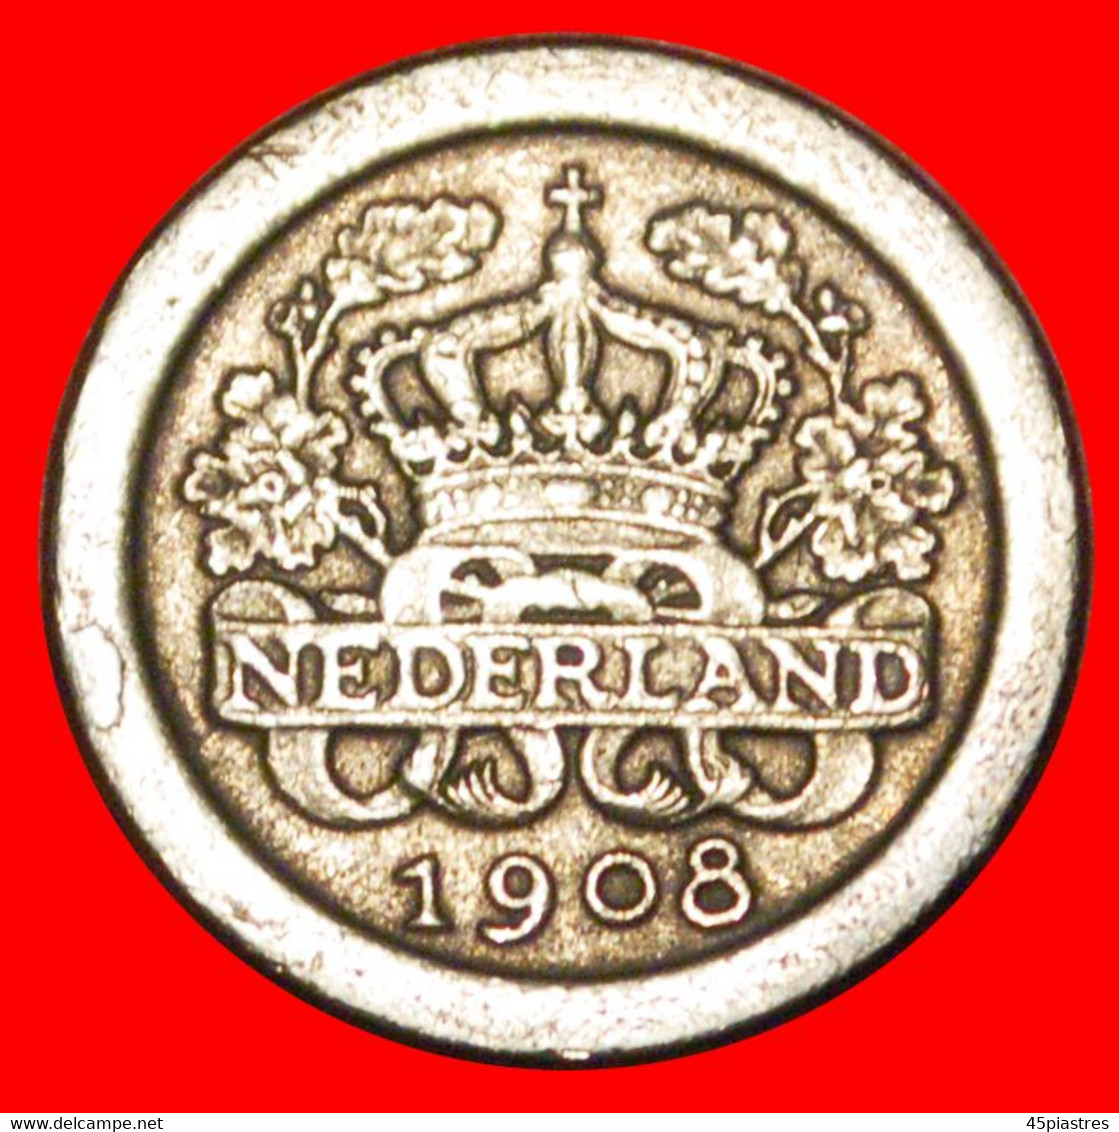 * CROWN AND OAK BRANCHES (1907-1909): NETHERLANDS ★ 5 CENTS 1908 UNCOMMON! WILHELMINA 1890-1948★LOW START ★ NO RESERVE! - 5 Cent